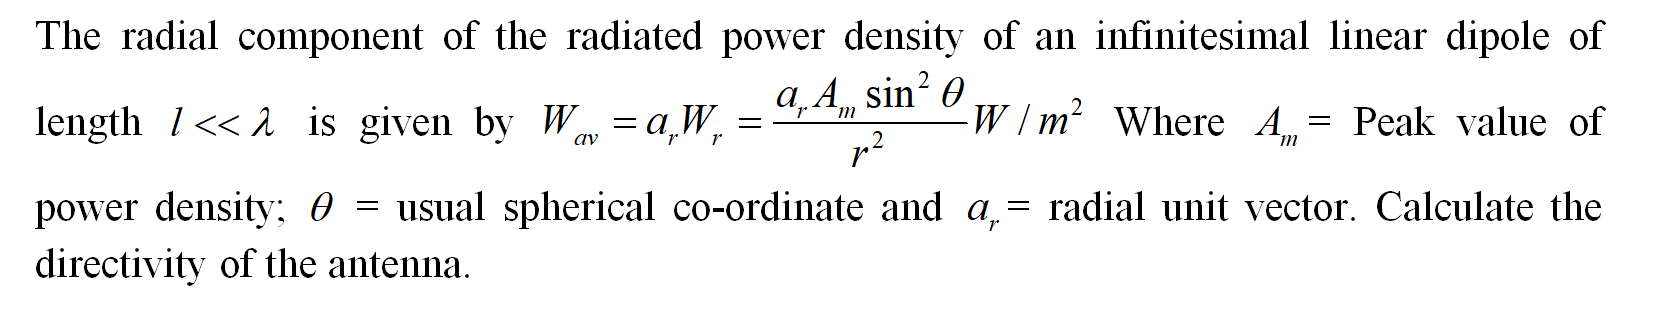 The radial component of the radiated power density of an infinitesimal linear dipole of
length 1<< 1 is given by W av = a,W, =
a, A, sin? 0
-W/m² Where A = Peak value of
`m
`m
r
power density; 0 = usual spherical co-ordinate and a,= radial unit vector. Calculate the
directivity of the antenna.
